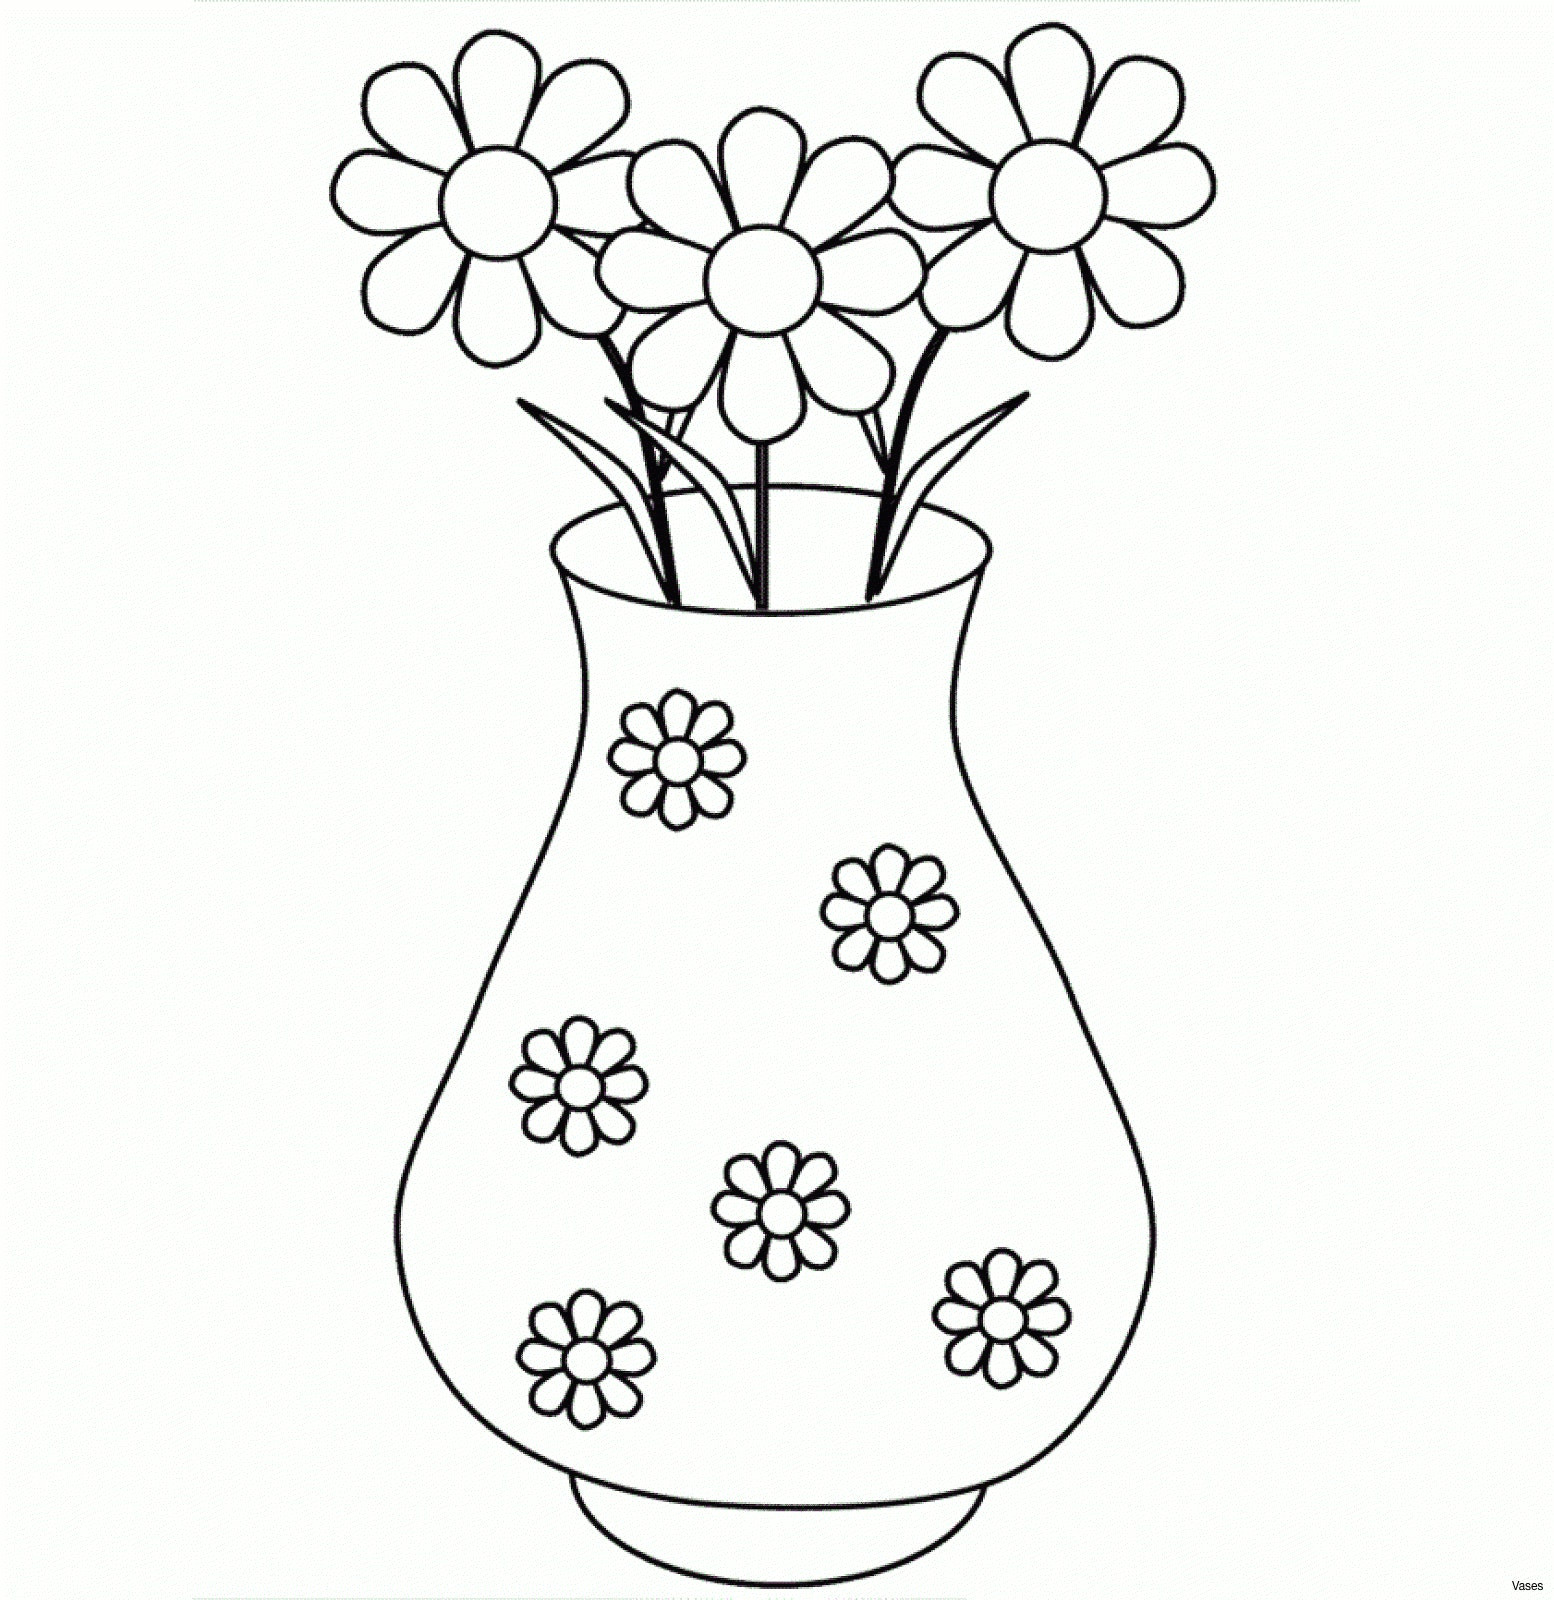 Drawing Of Flowers In A Pot How to Draw A Easy Flower for Beginners Prslide Com